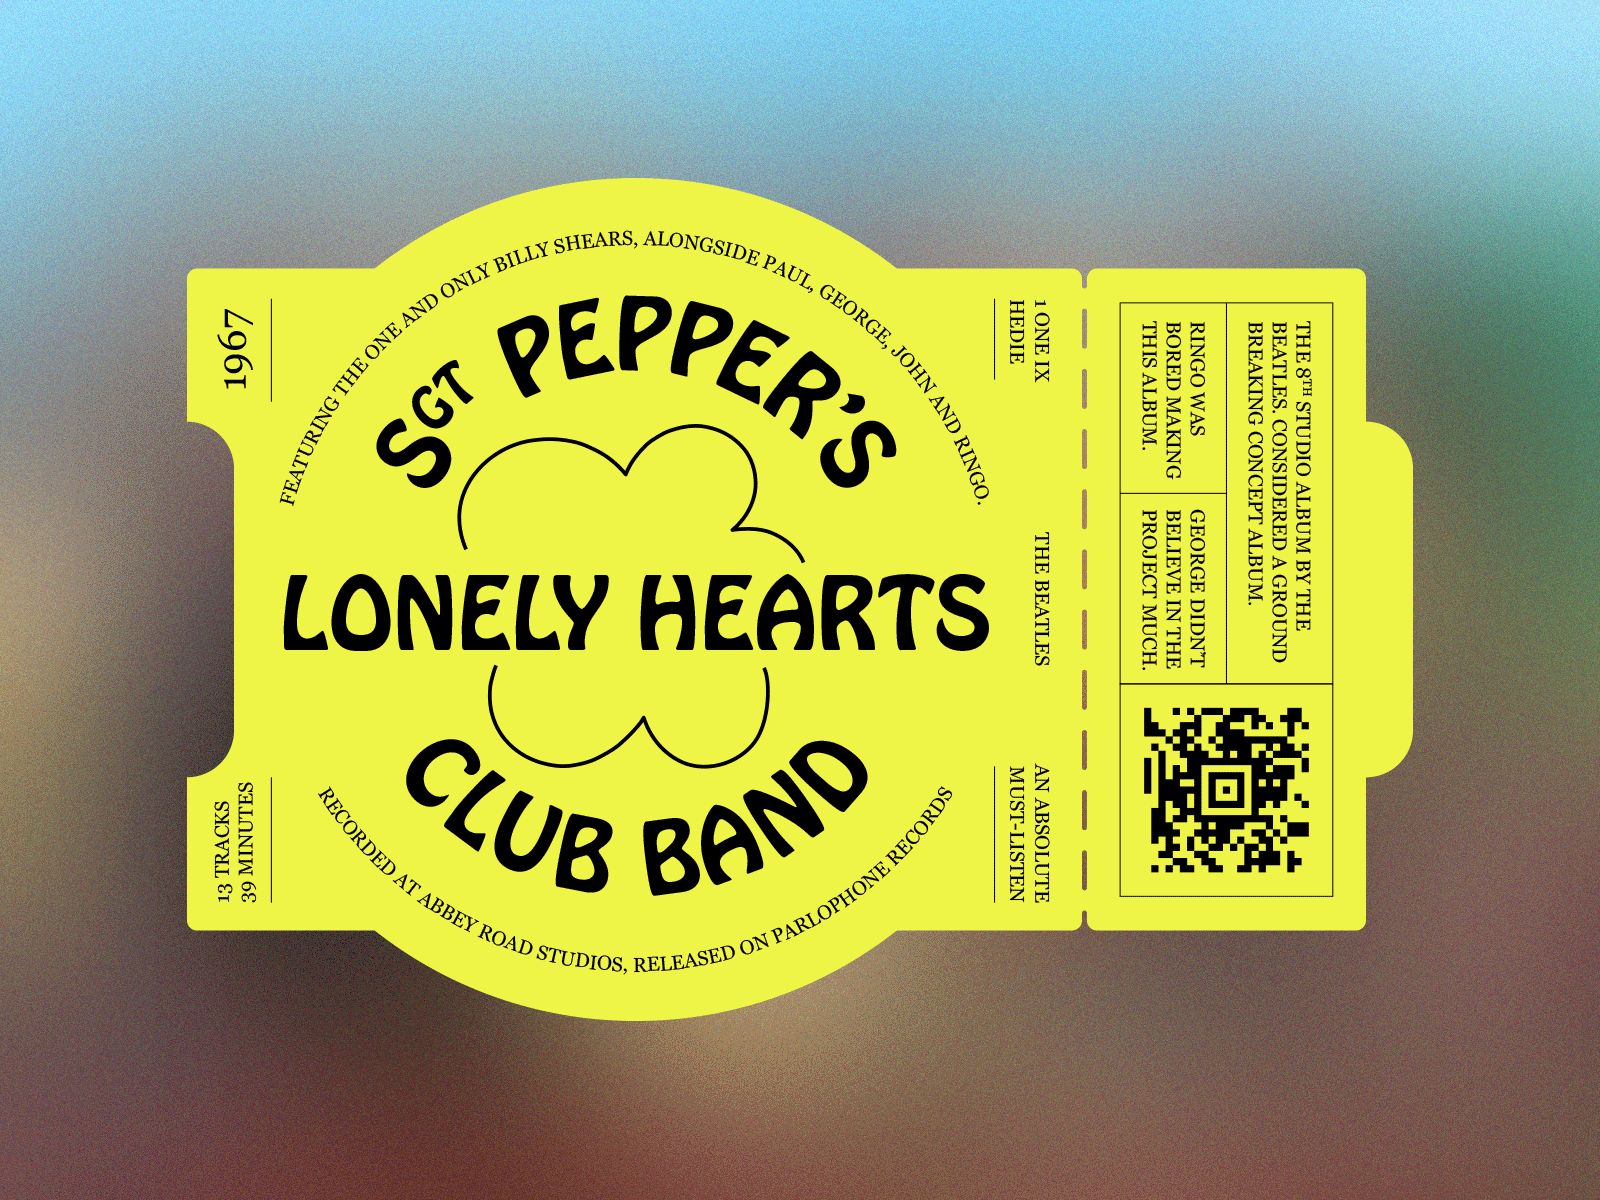 Sgt Pepper's Lonely Hearts Club Band – Record Labels #009 album art beatles label labeldesign music music design sgt pepper sgt peppers sticker sticker design the beatles type type layout typographic typographic layout typographic poster typography